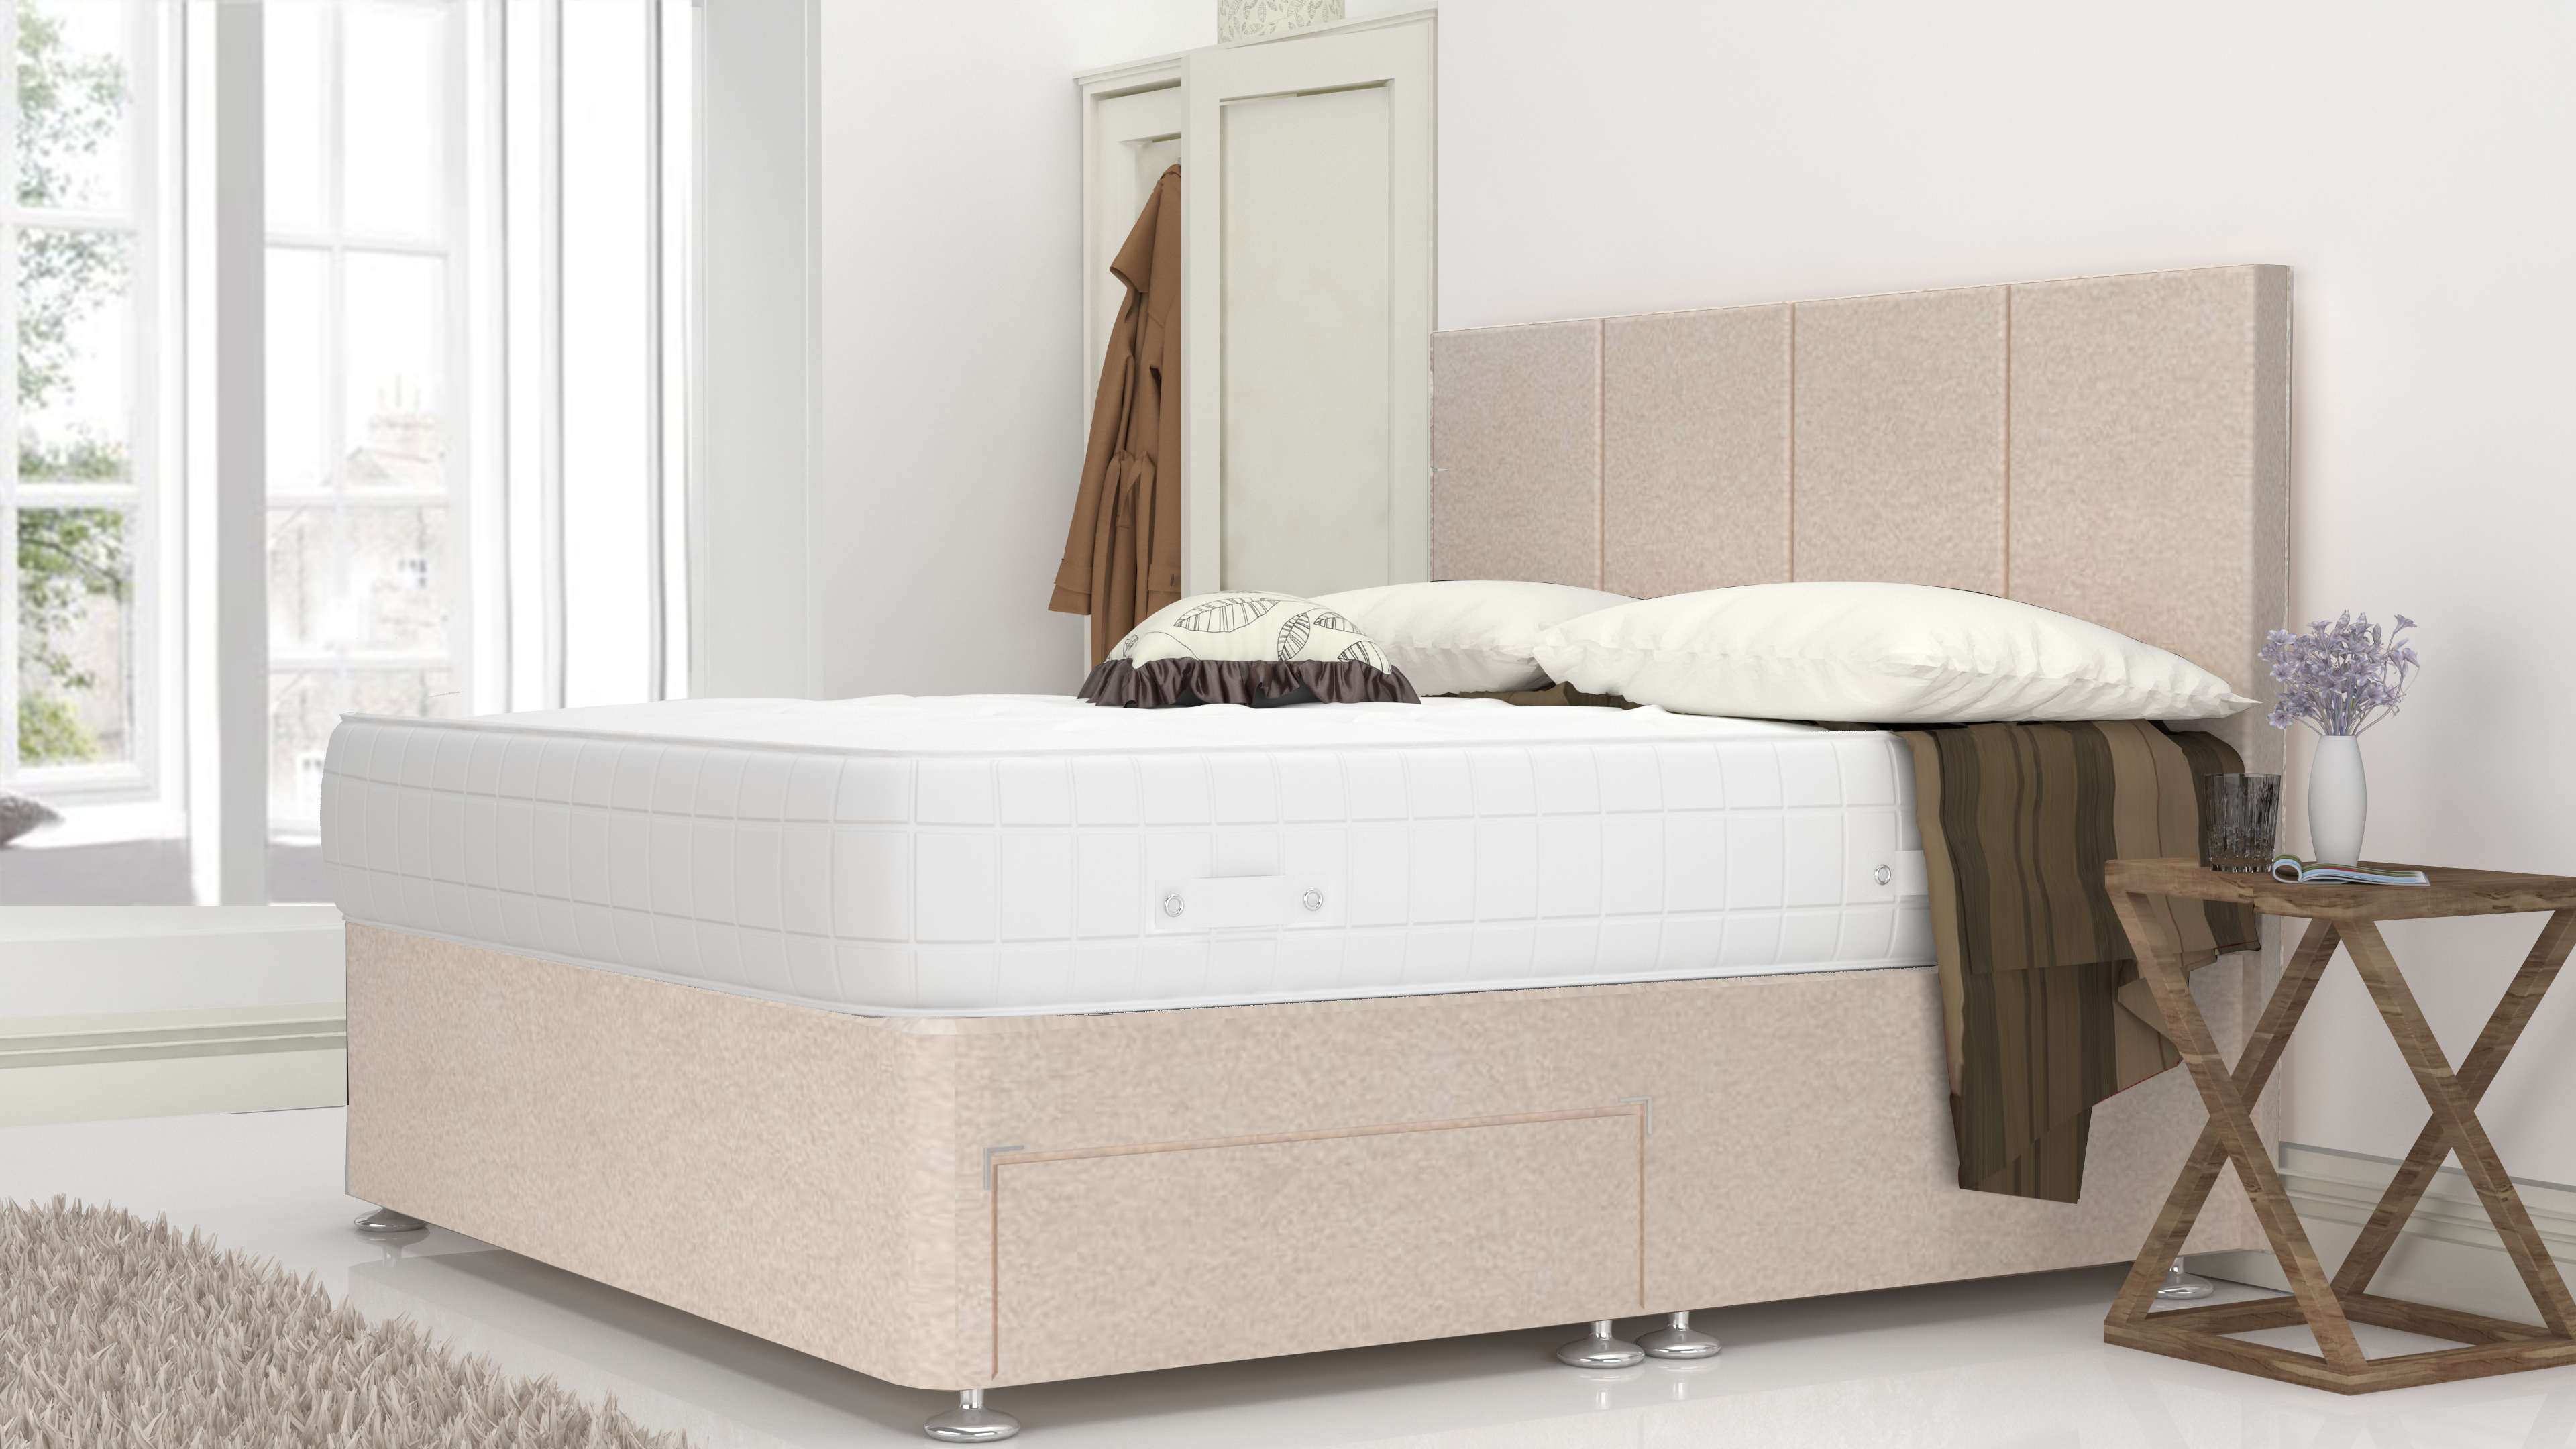 Cream Chanille 4 Feet Divan Bed Set With 4 Panel Headboard (Included Feet) And Free Tinsel Top Mattress